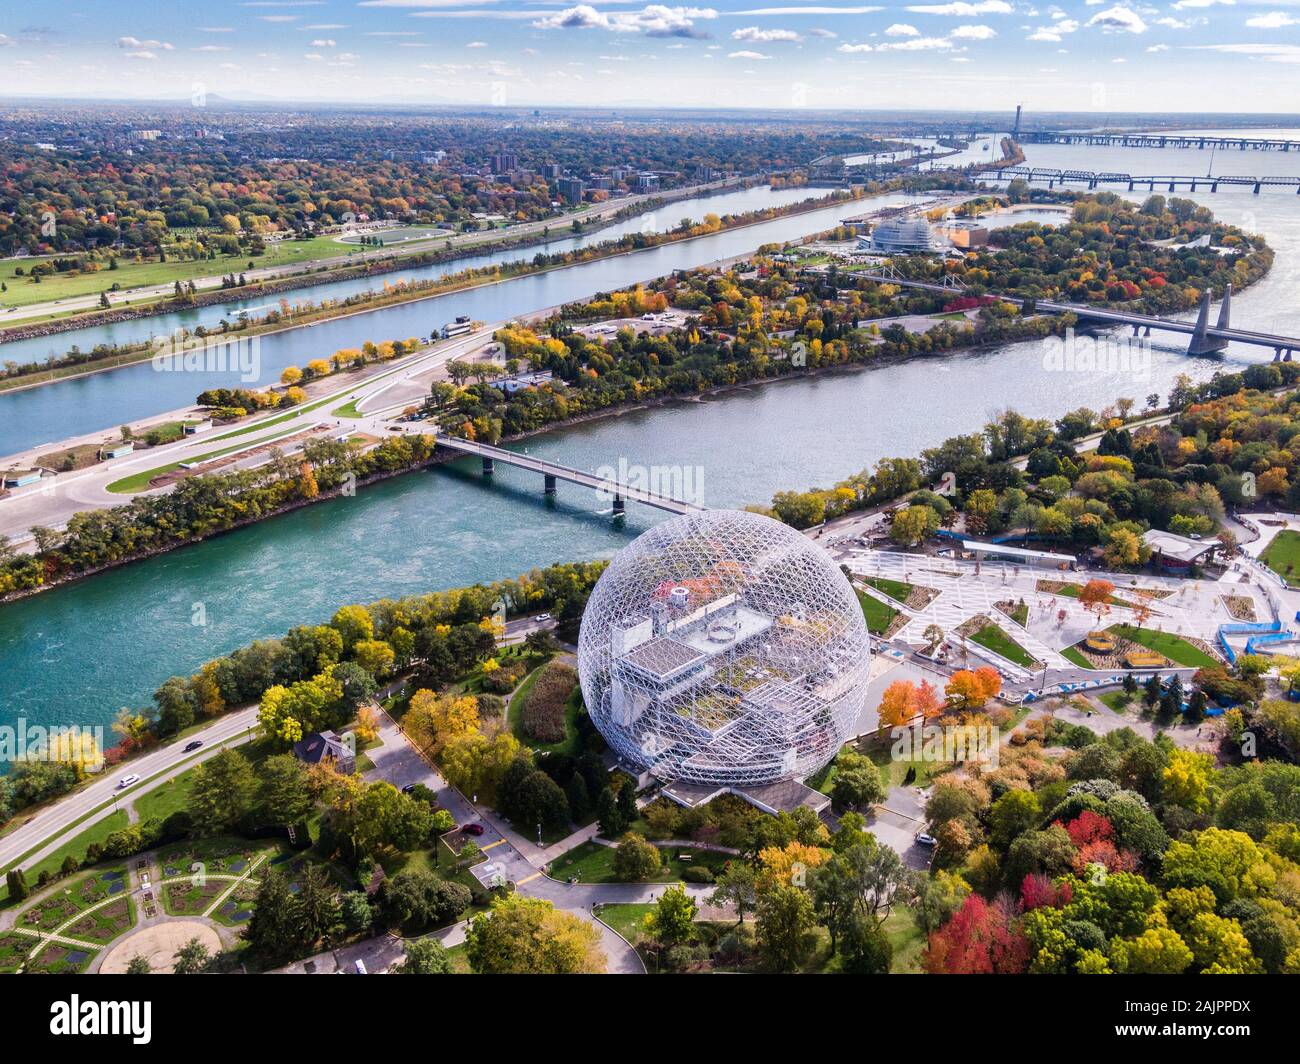 Aerial view of Montreal showing the Biosphere Environment Museum and Saint Lawrence River in fall season in Quebec, Canada. Stock Photo